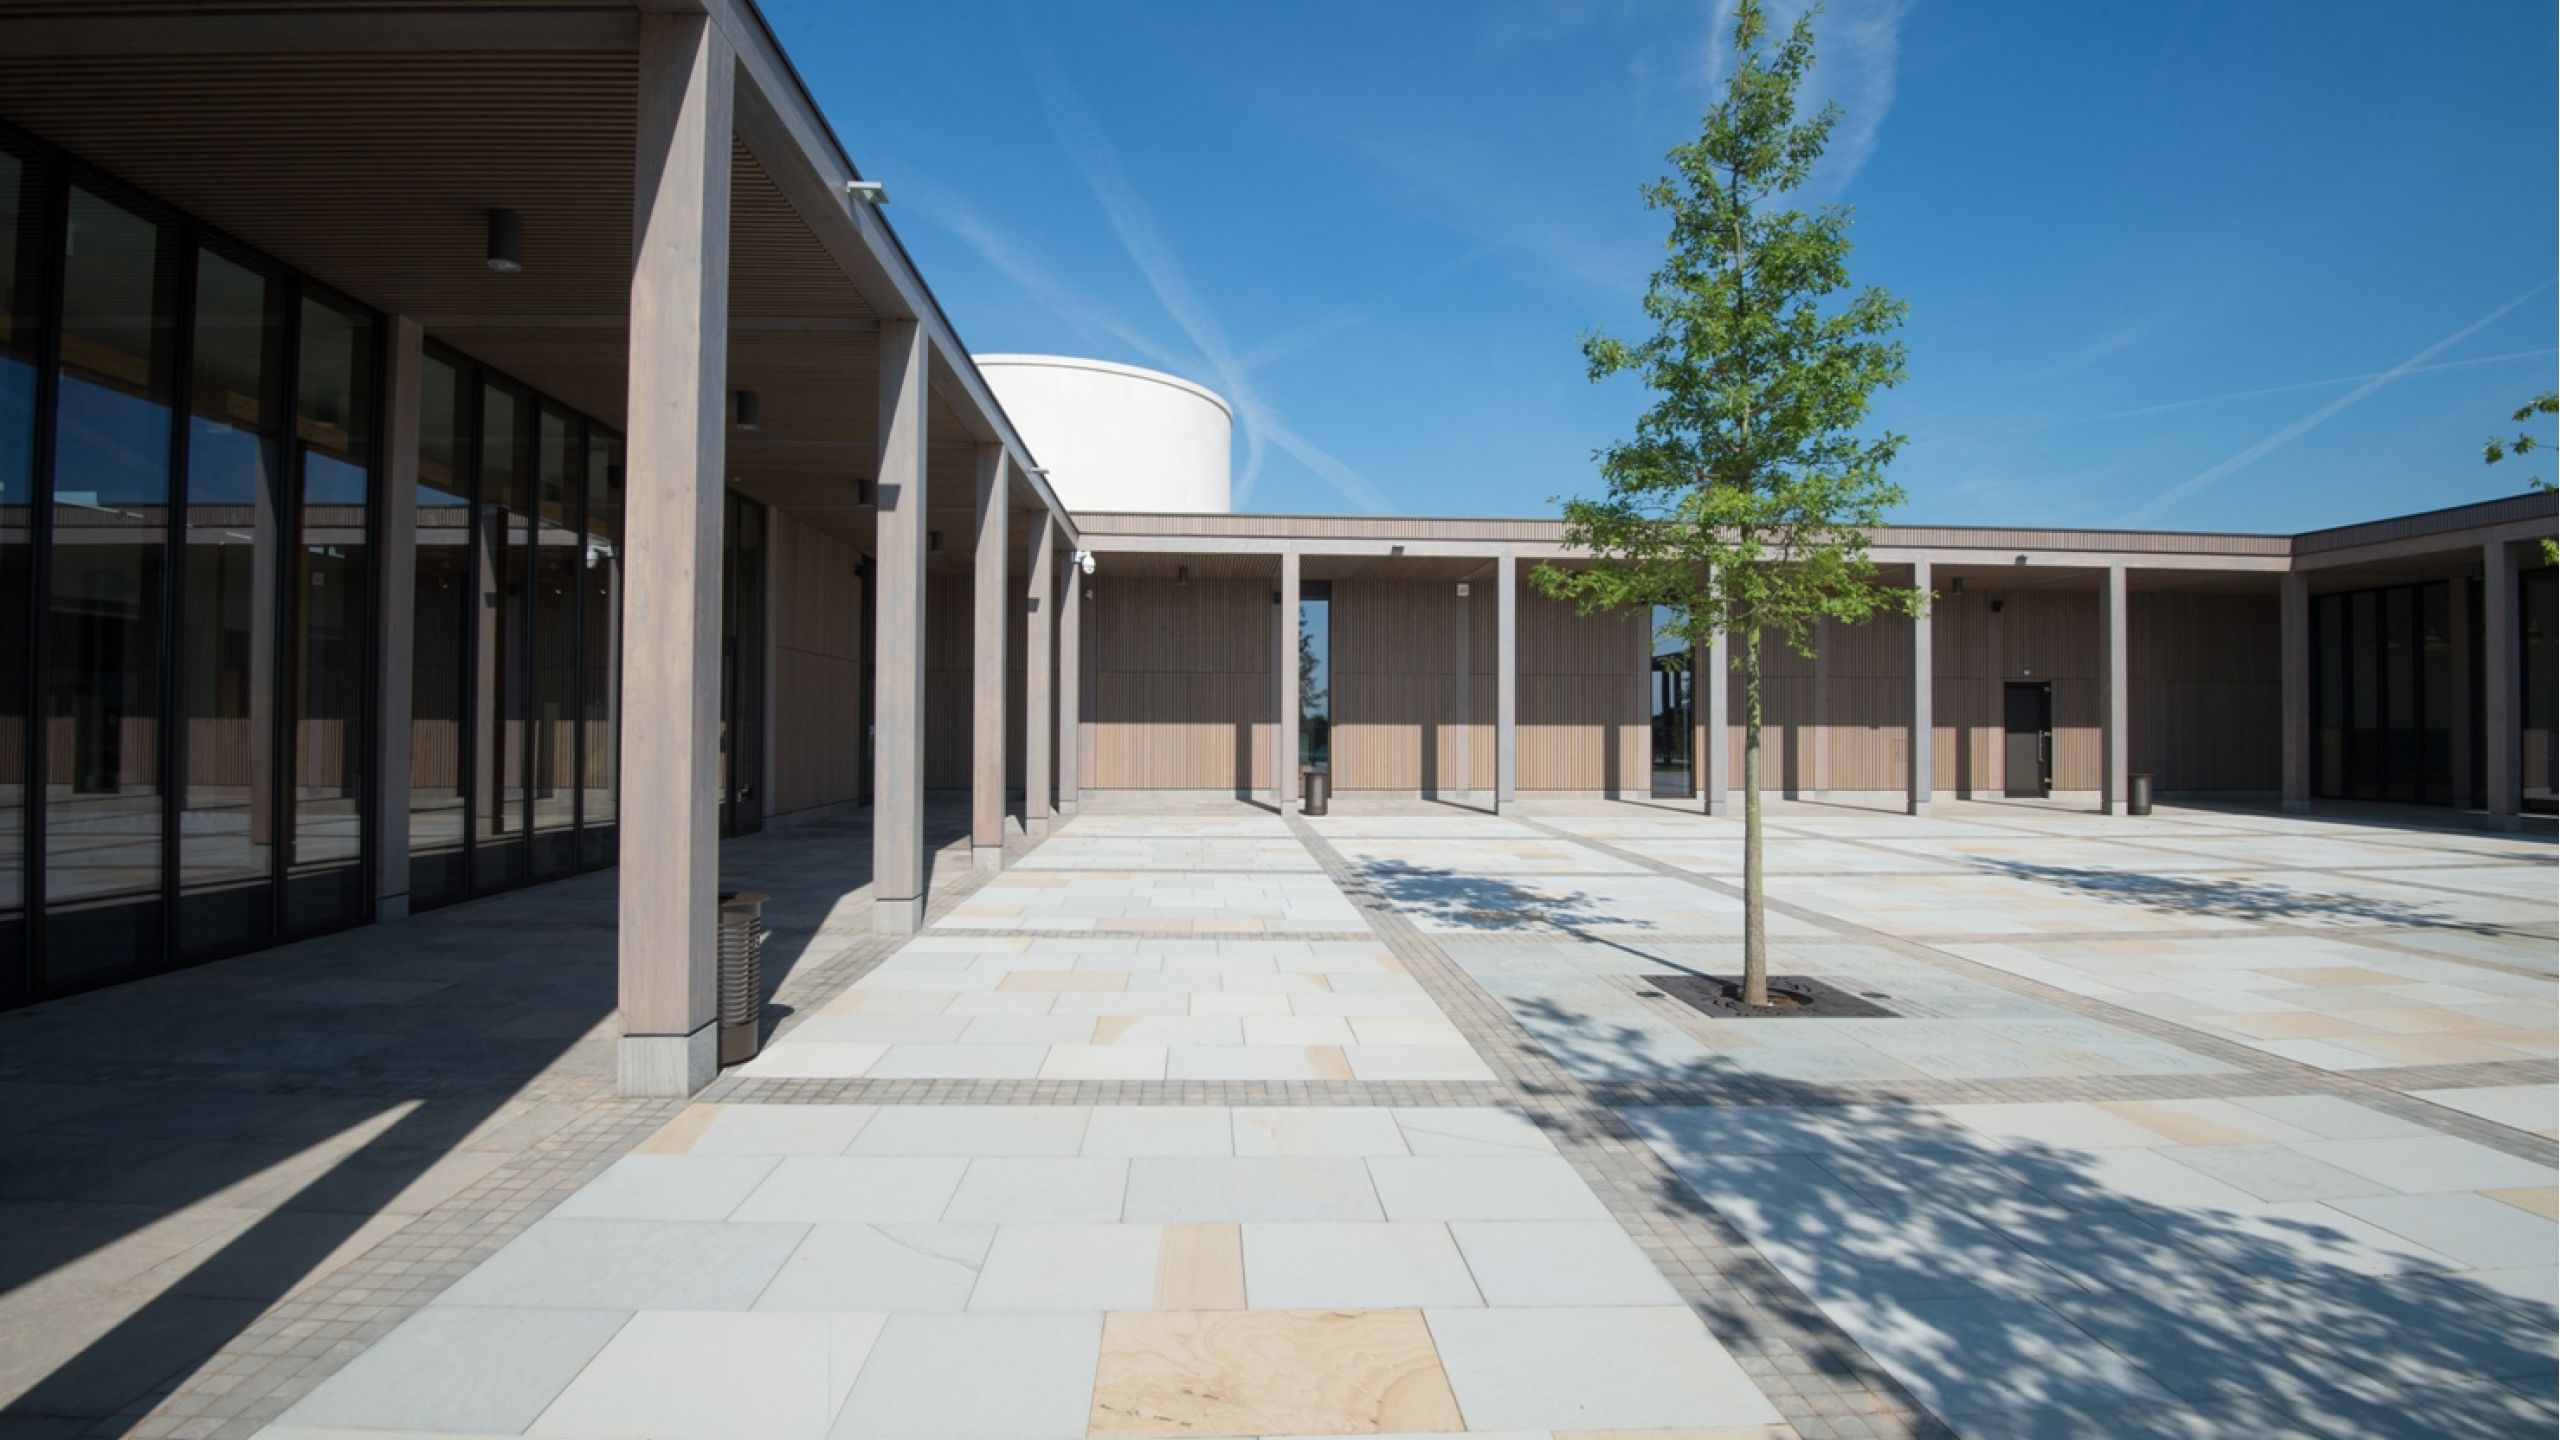 BCL grey stained wood cladding panels at National Memorial Arboretum project